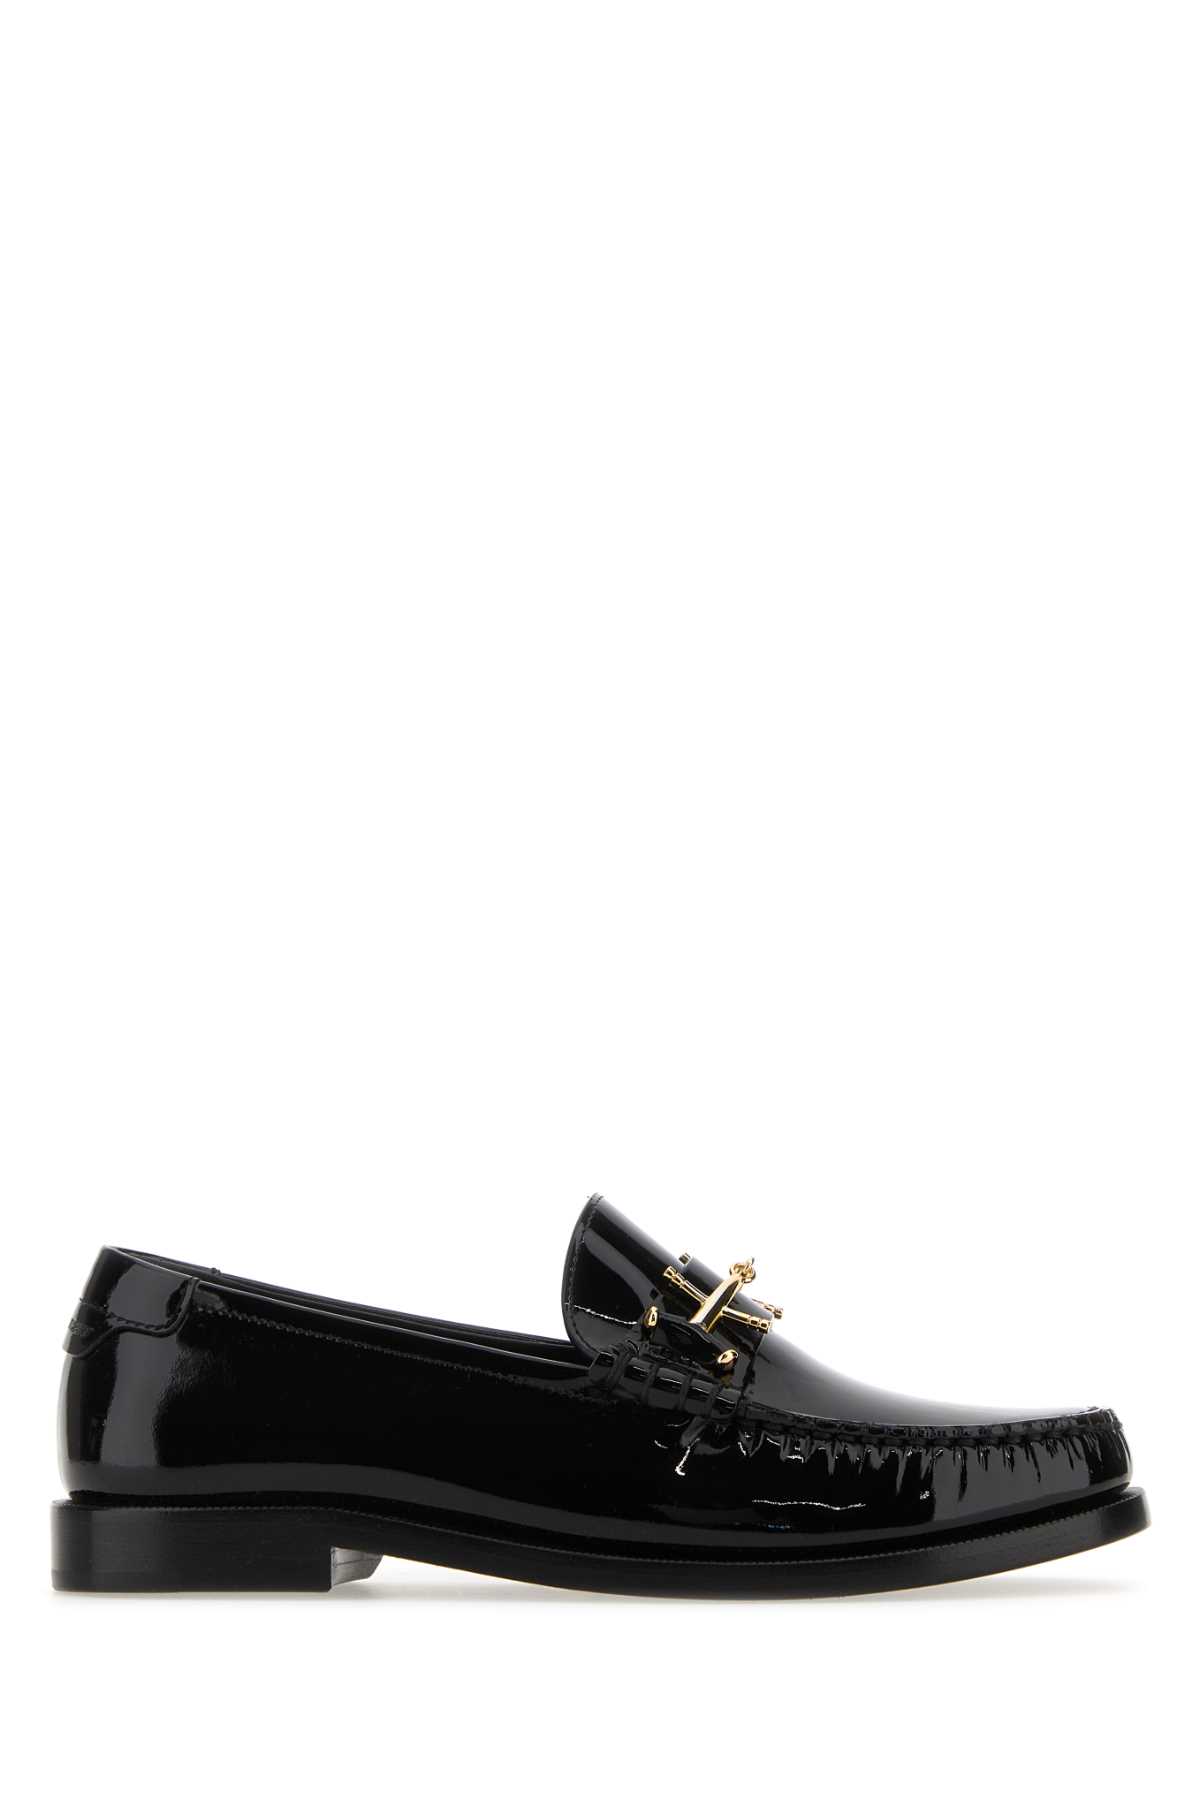 Saint Laurent Black Leather Le Loafers Loafers